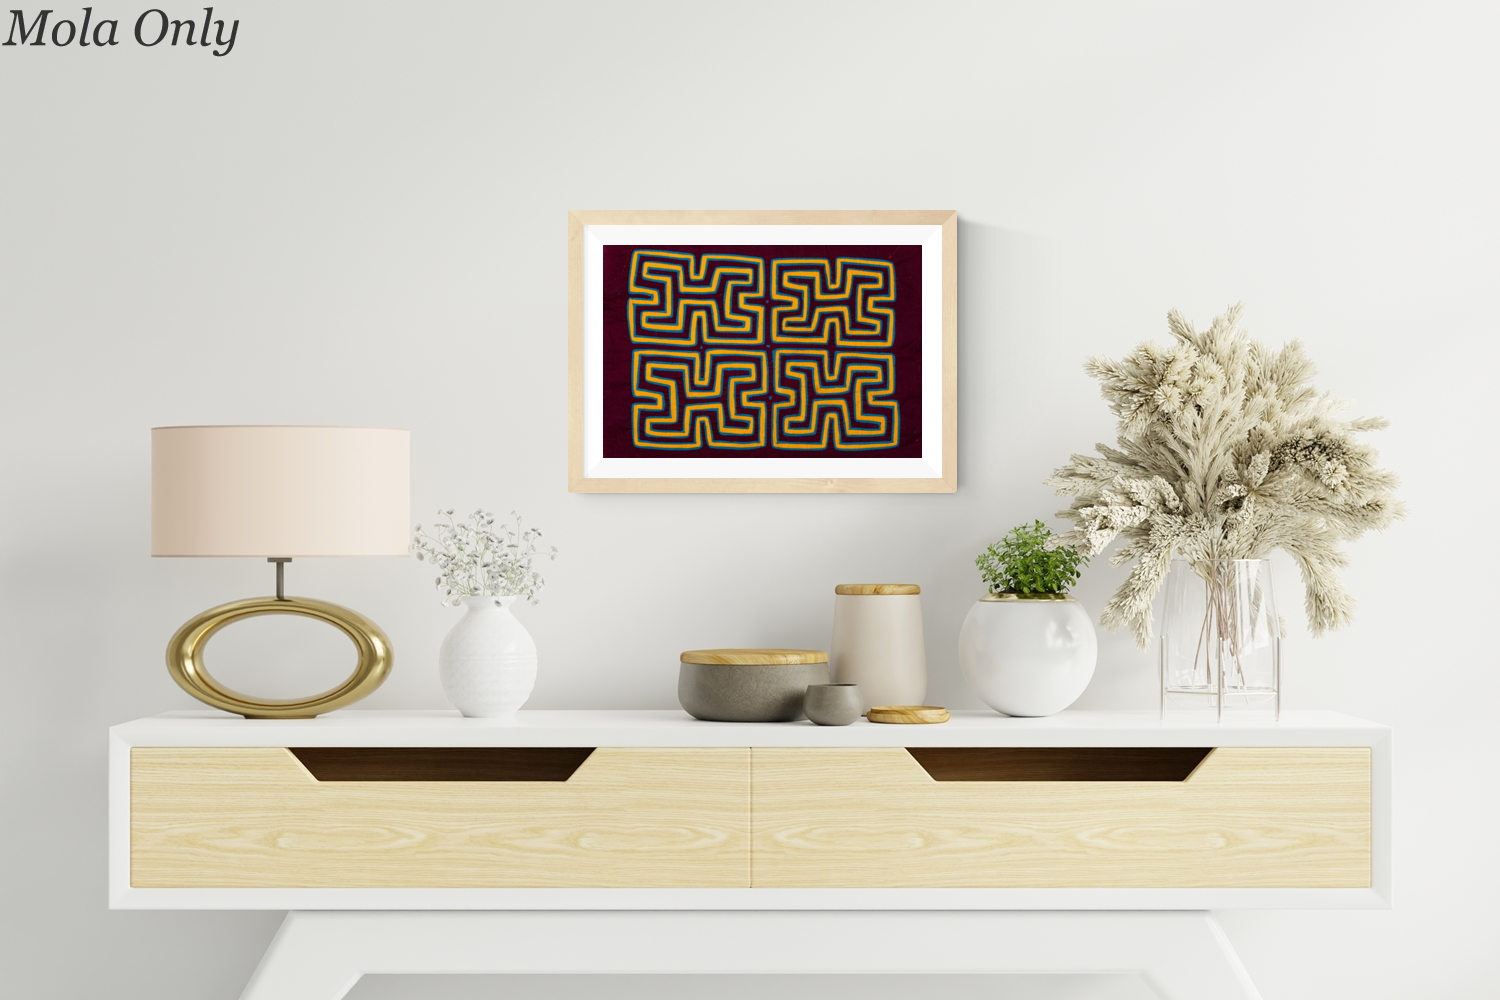 Maroon and Gold Classic Design Mola